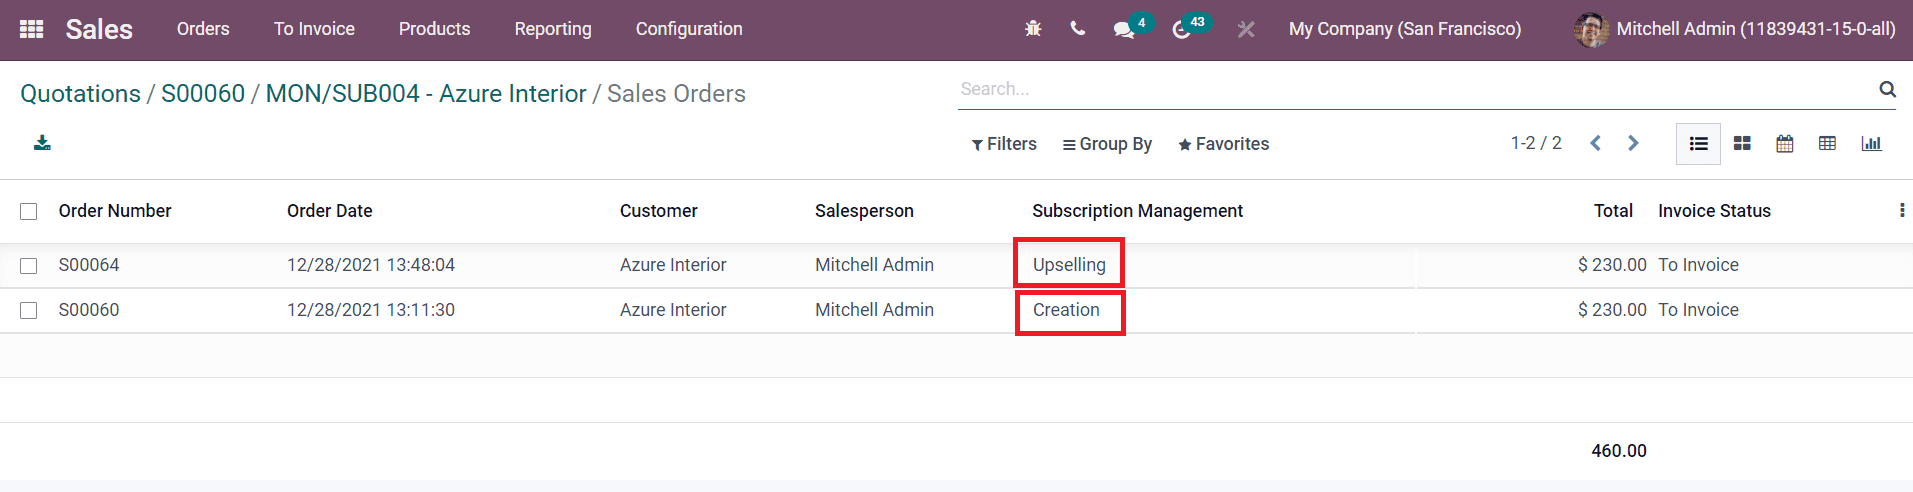 Odoo 15 subscriptions